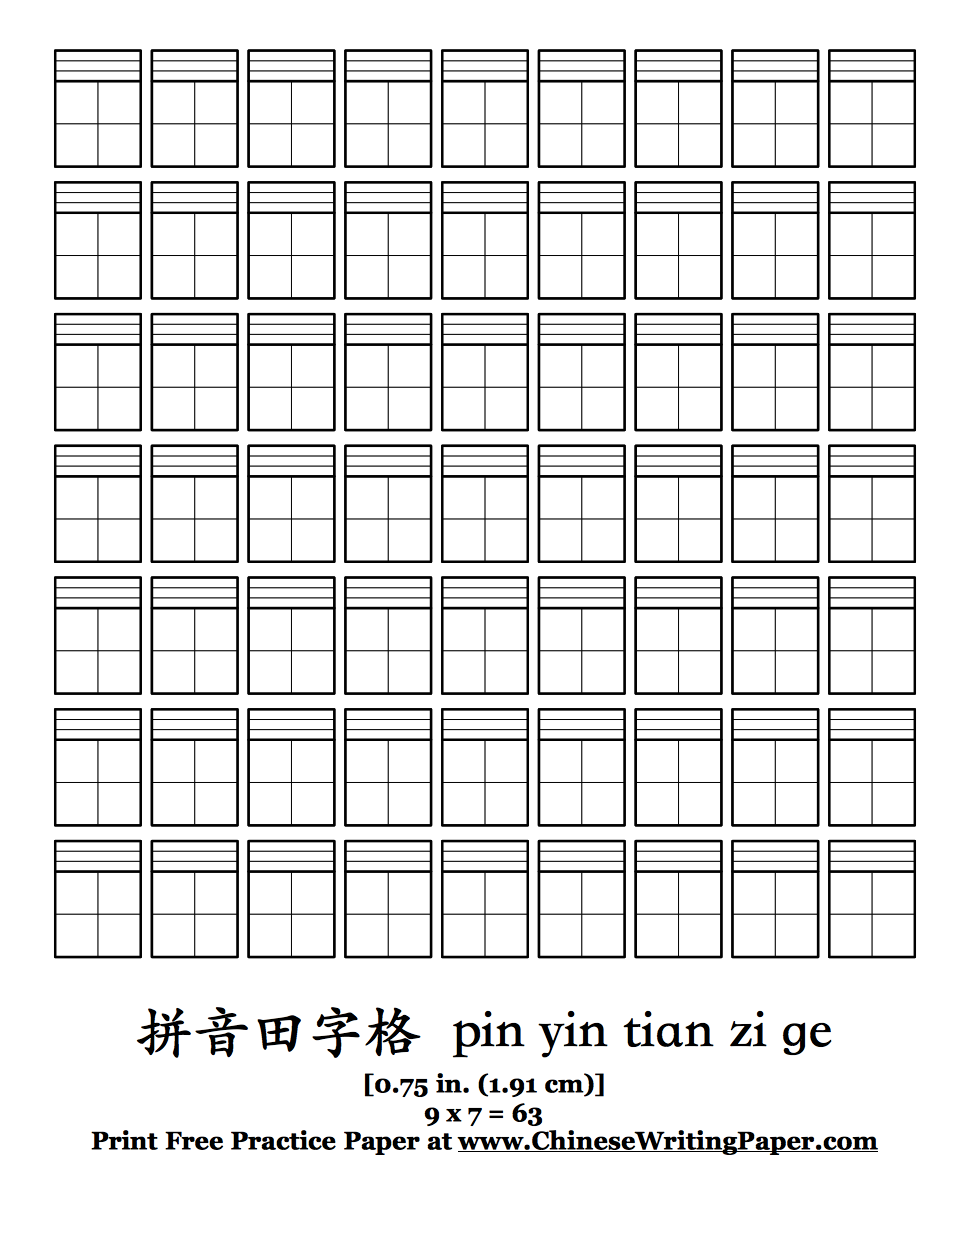 3000 chinese character dictionary pdf